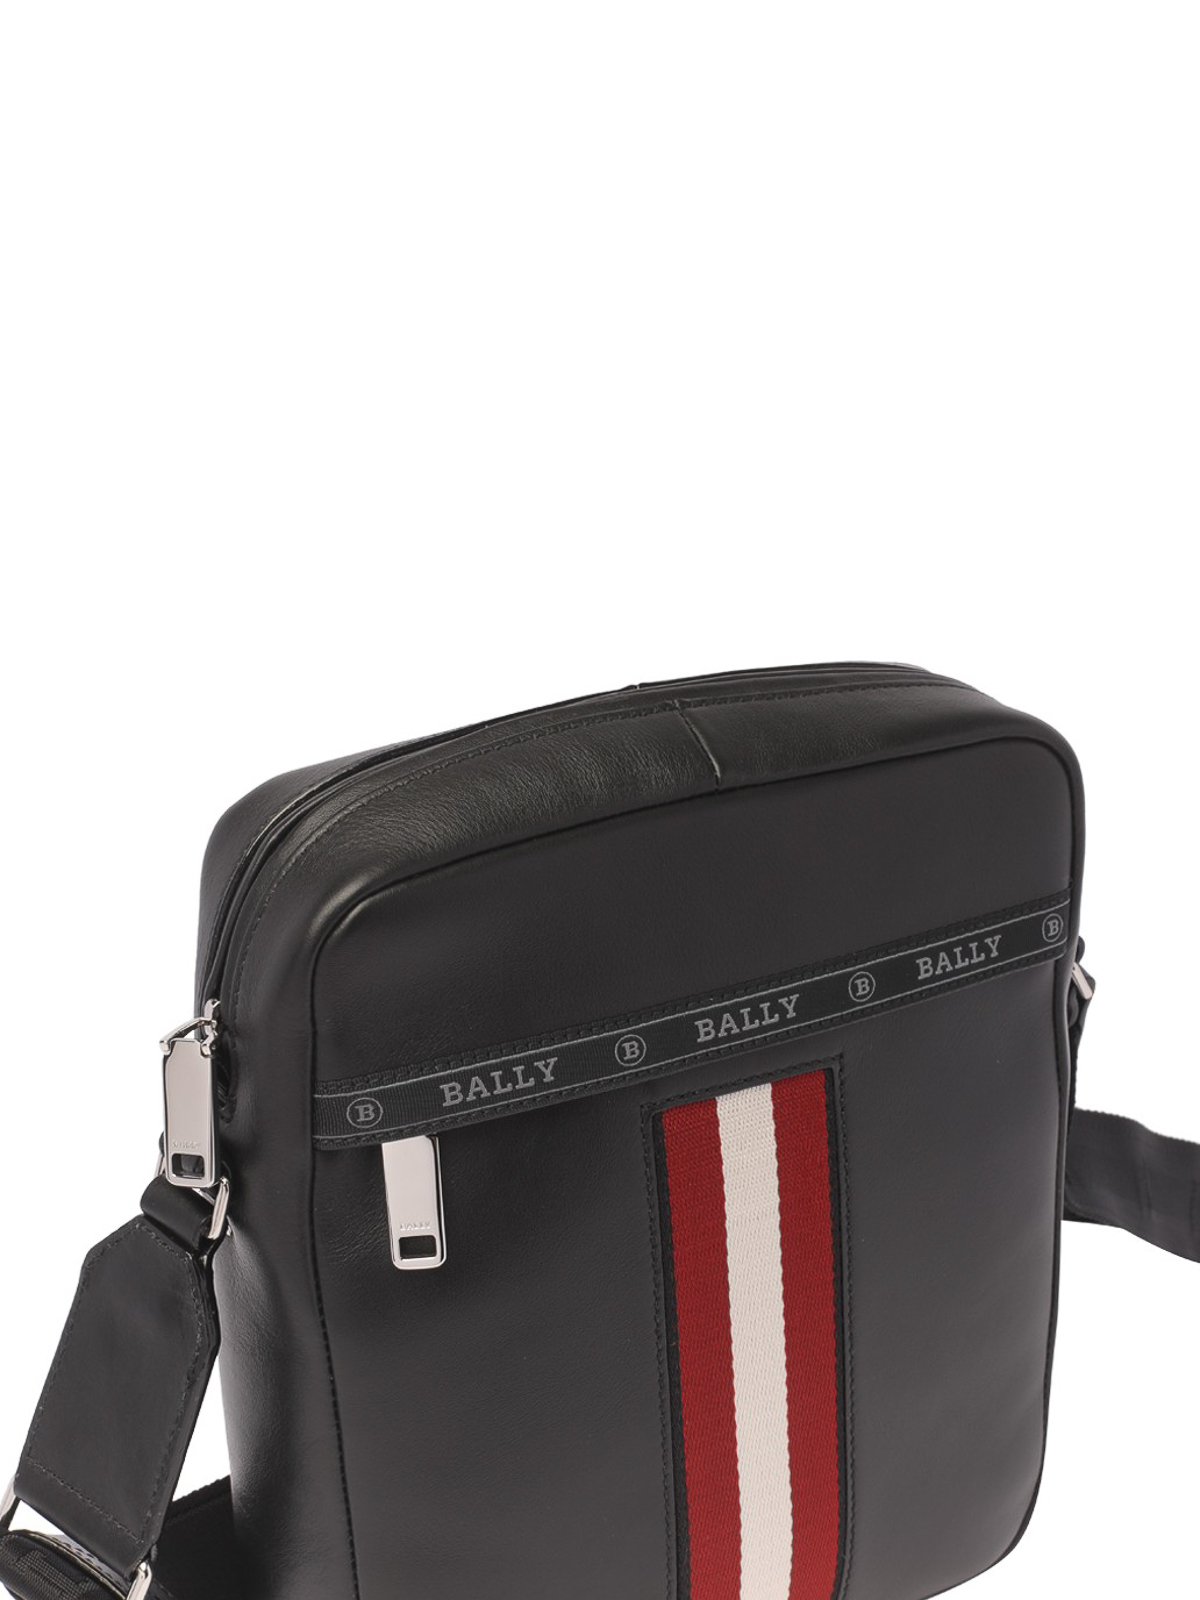 Cross body bags Bally - Holm leather bag - HOLMF210 | Shop online at iKRIX